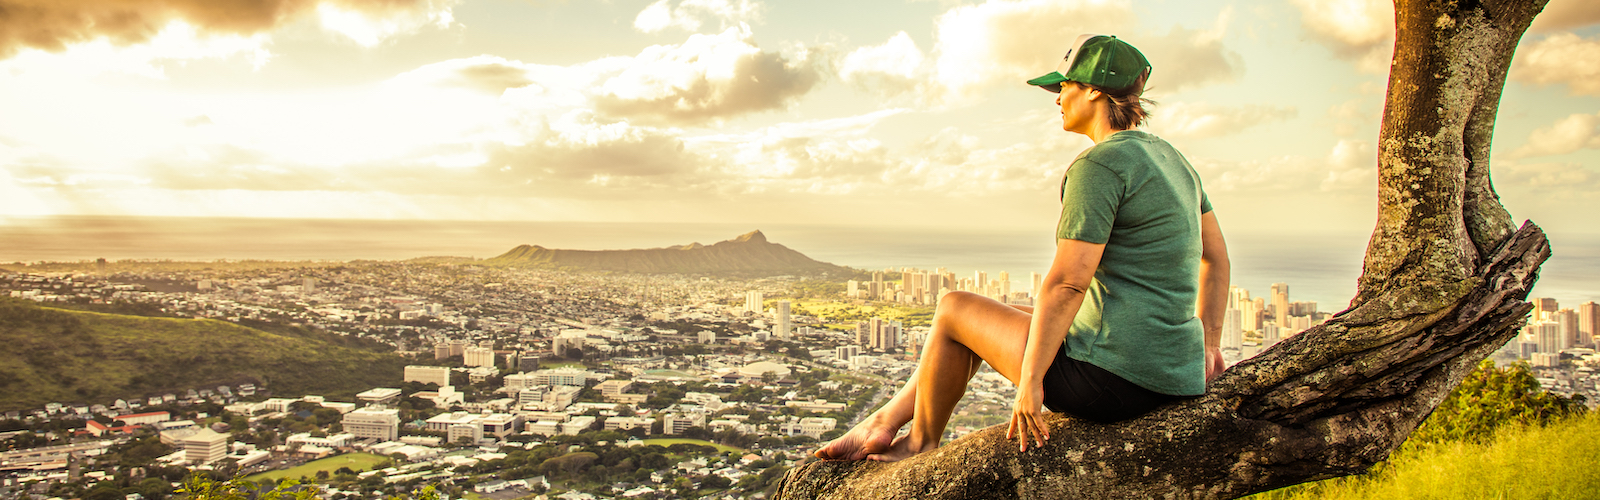 Oahu Private & Custom Sightseeing Tours with The Real Hawaii, Tantalus Lookout